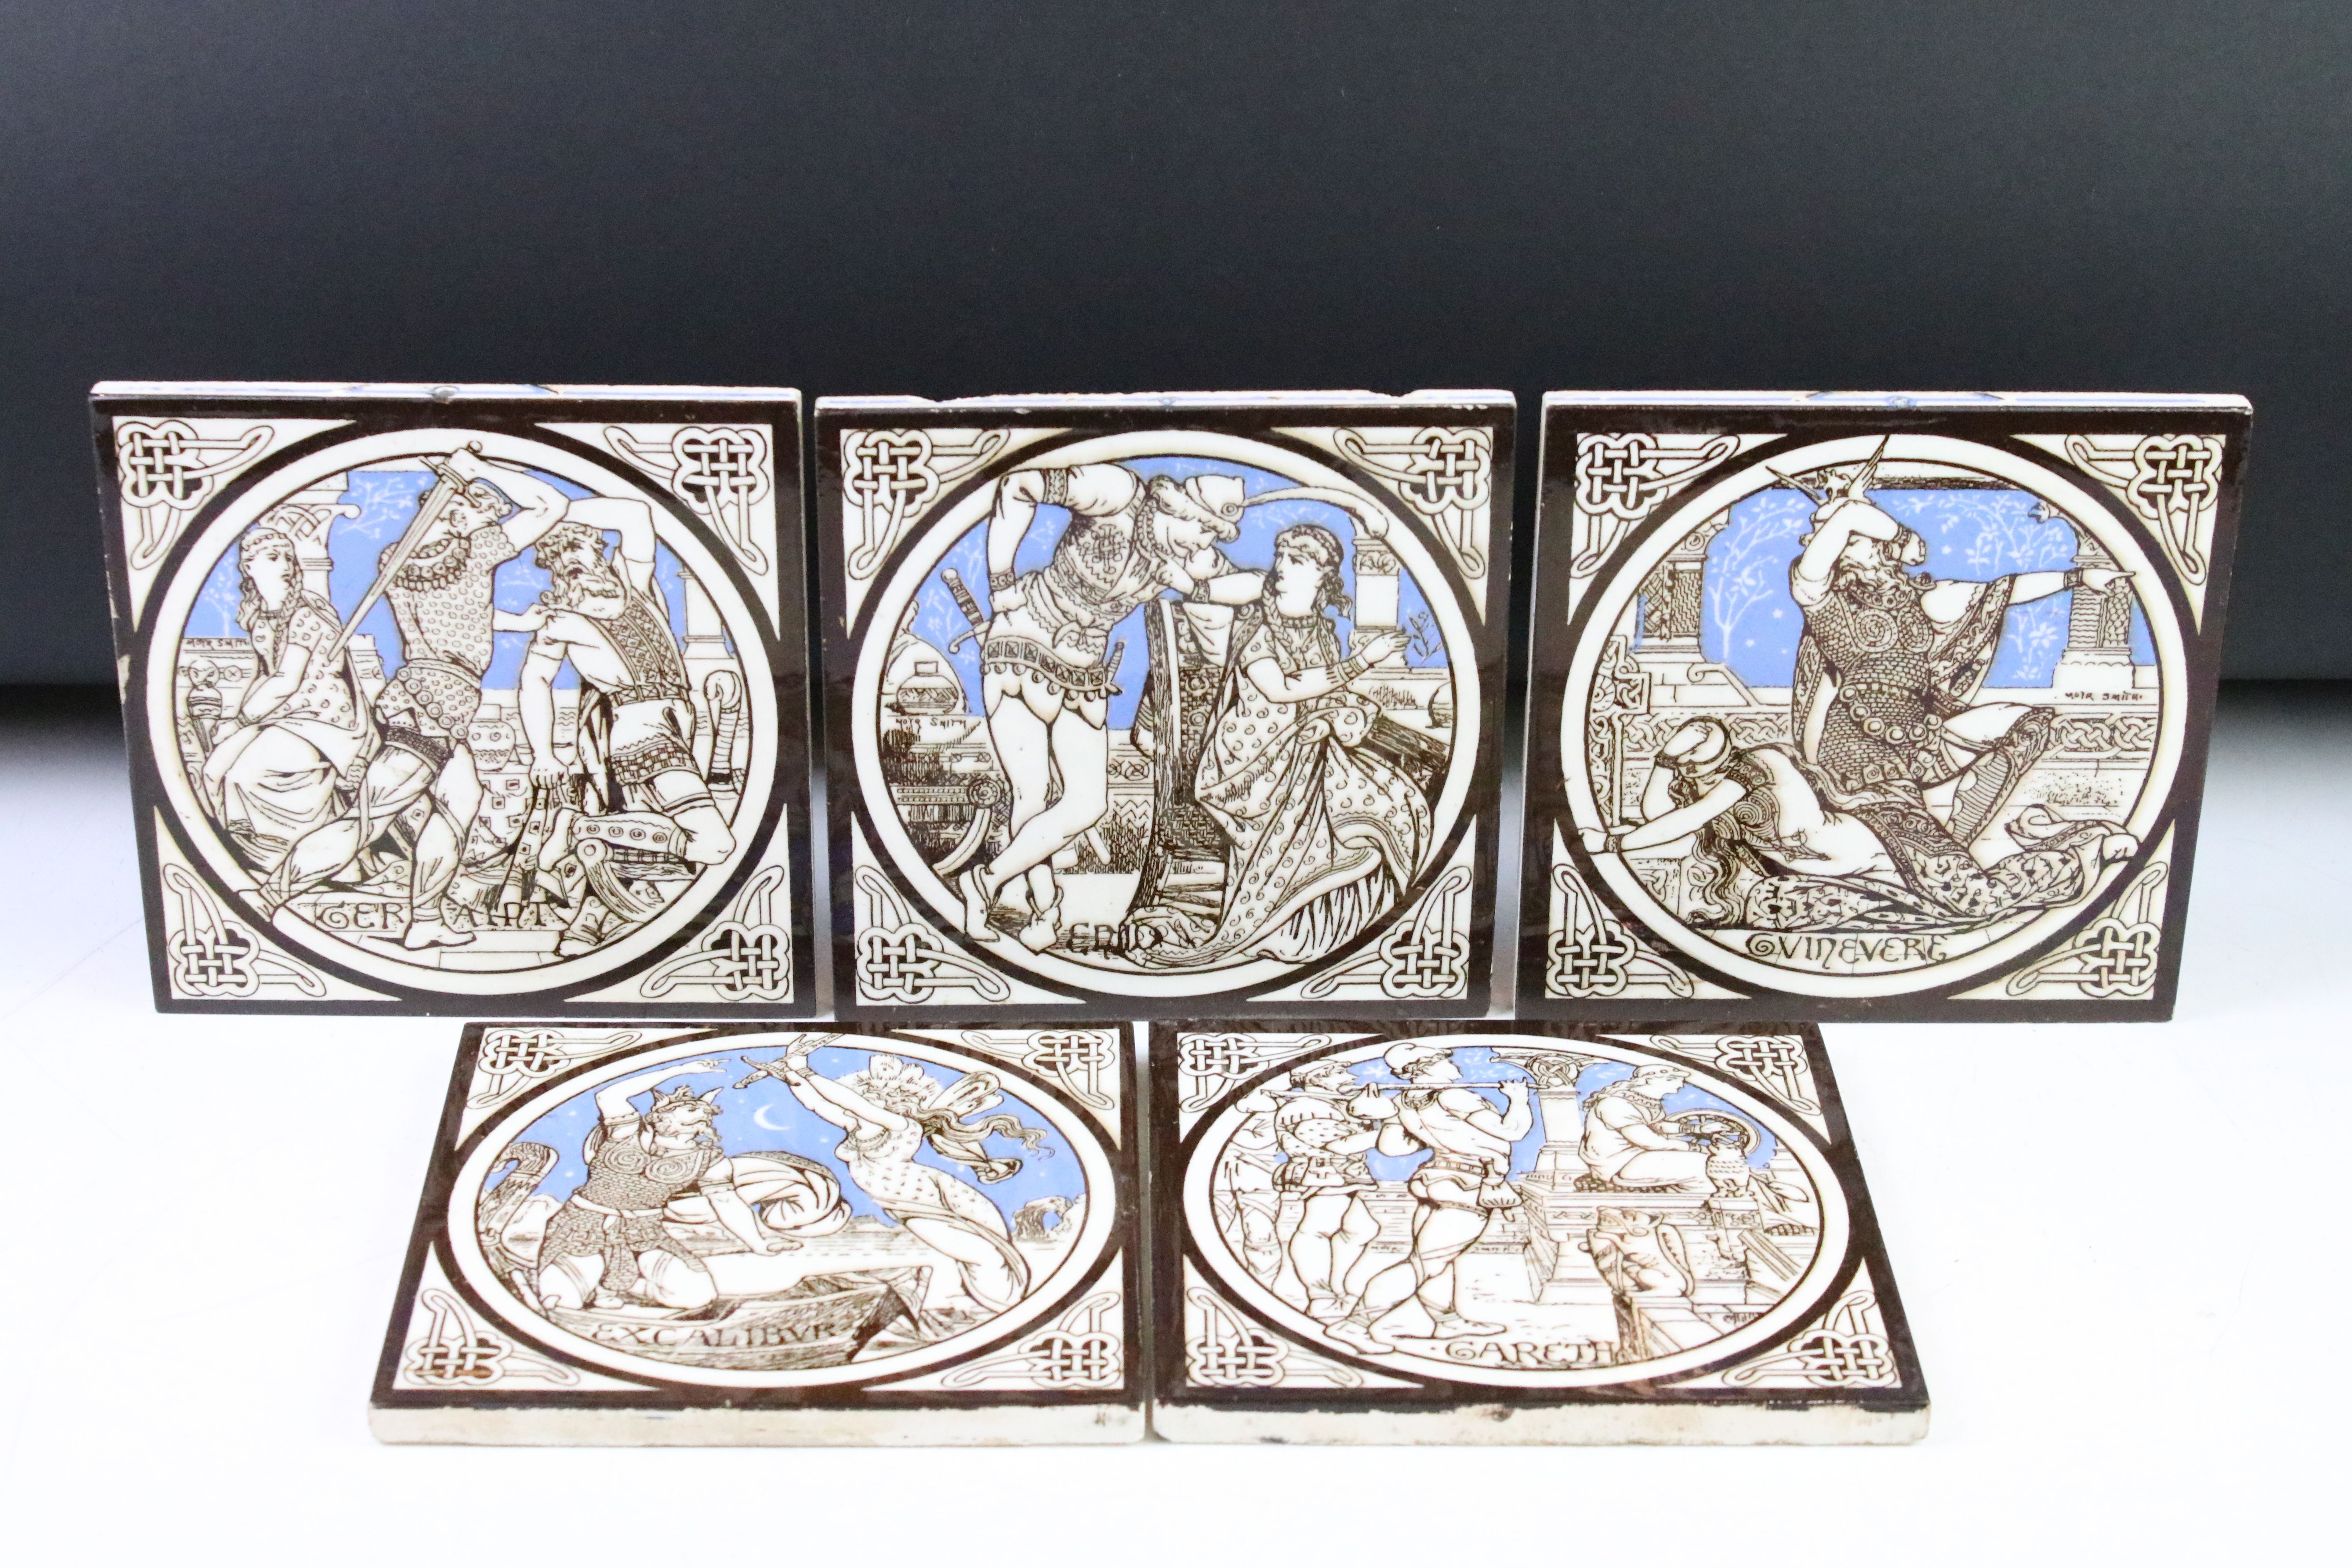 Five Minton China Works Tiles from the Idylls of the King Series designed by J Moyr Smith